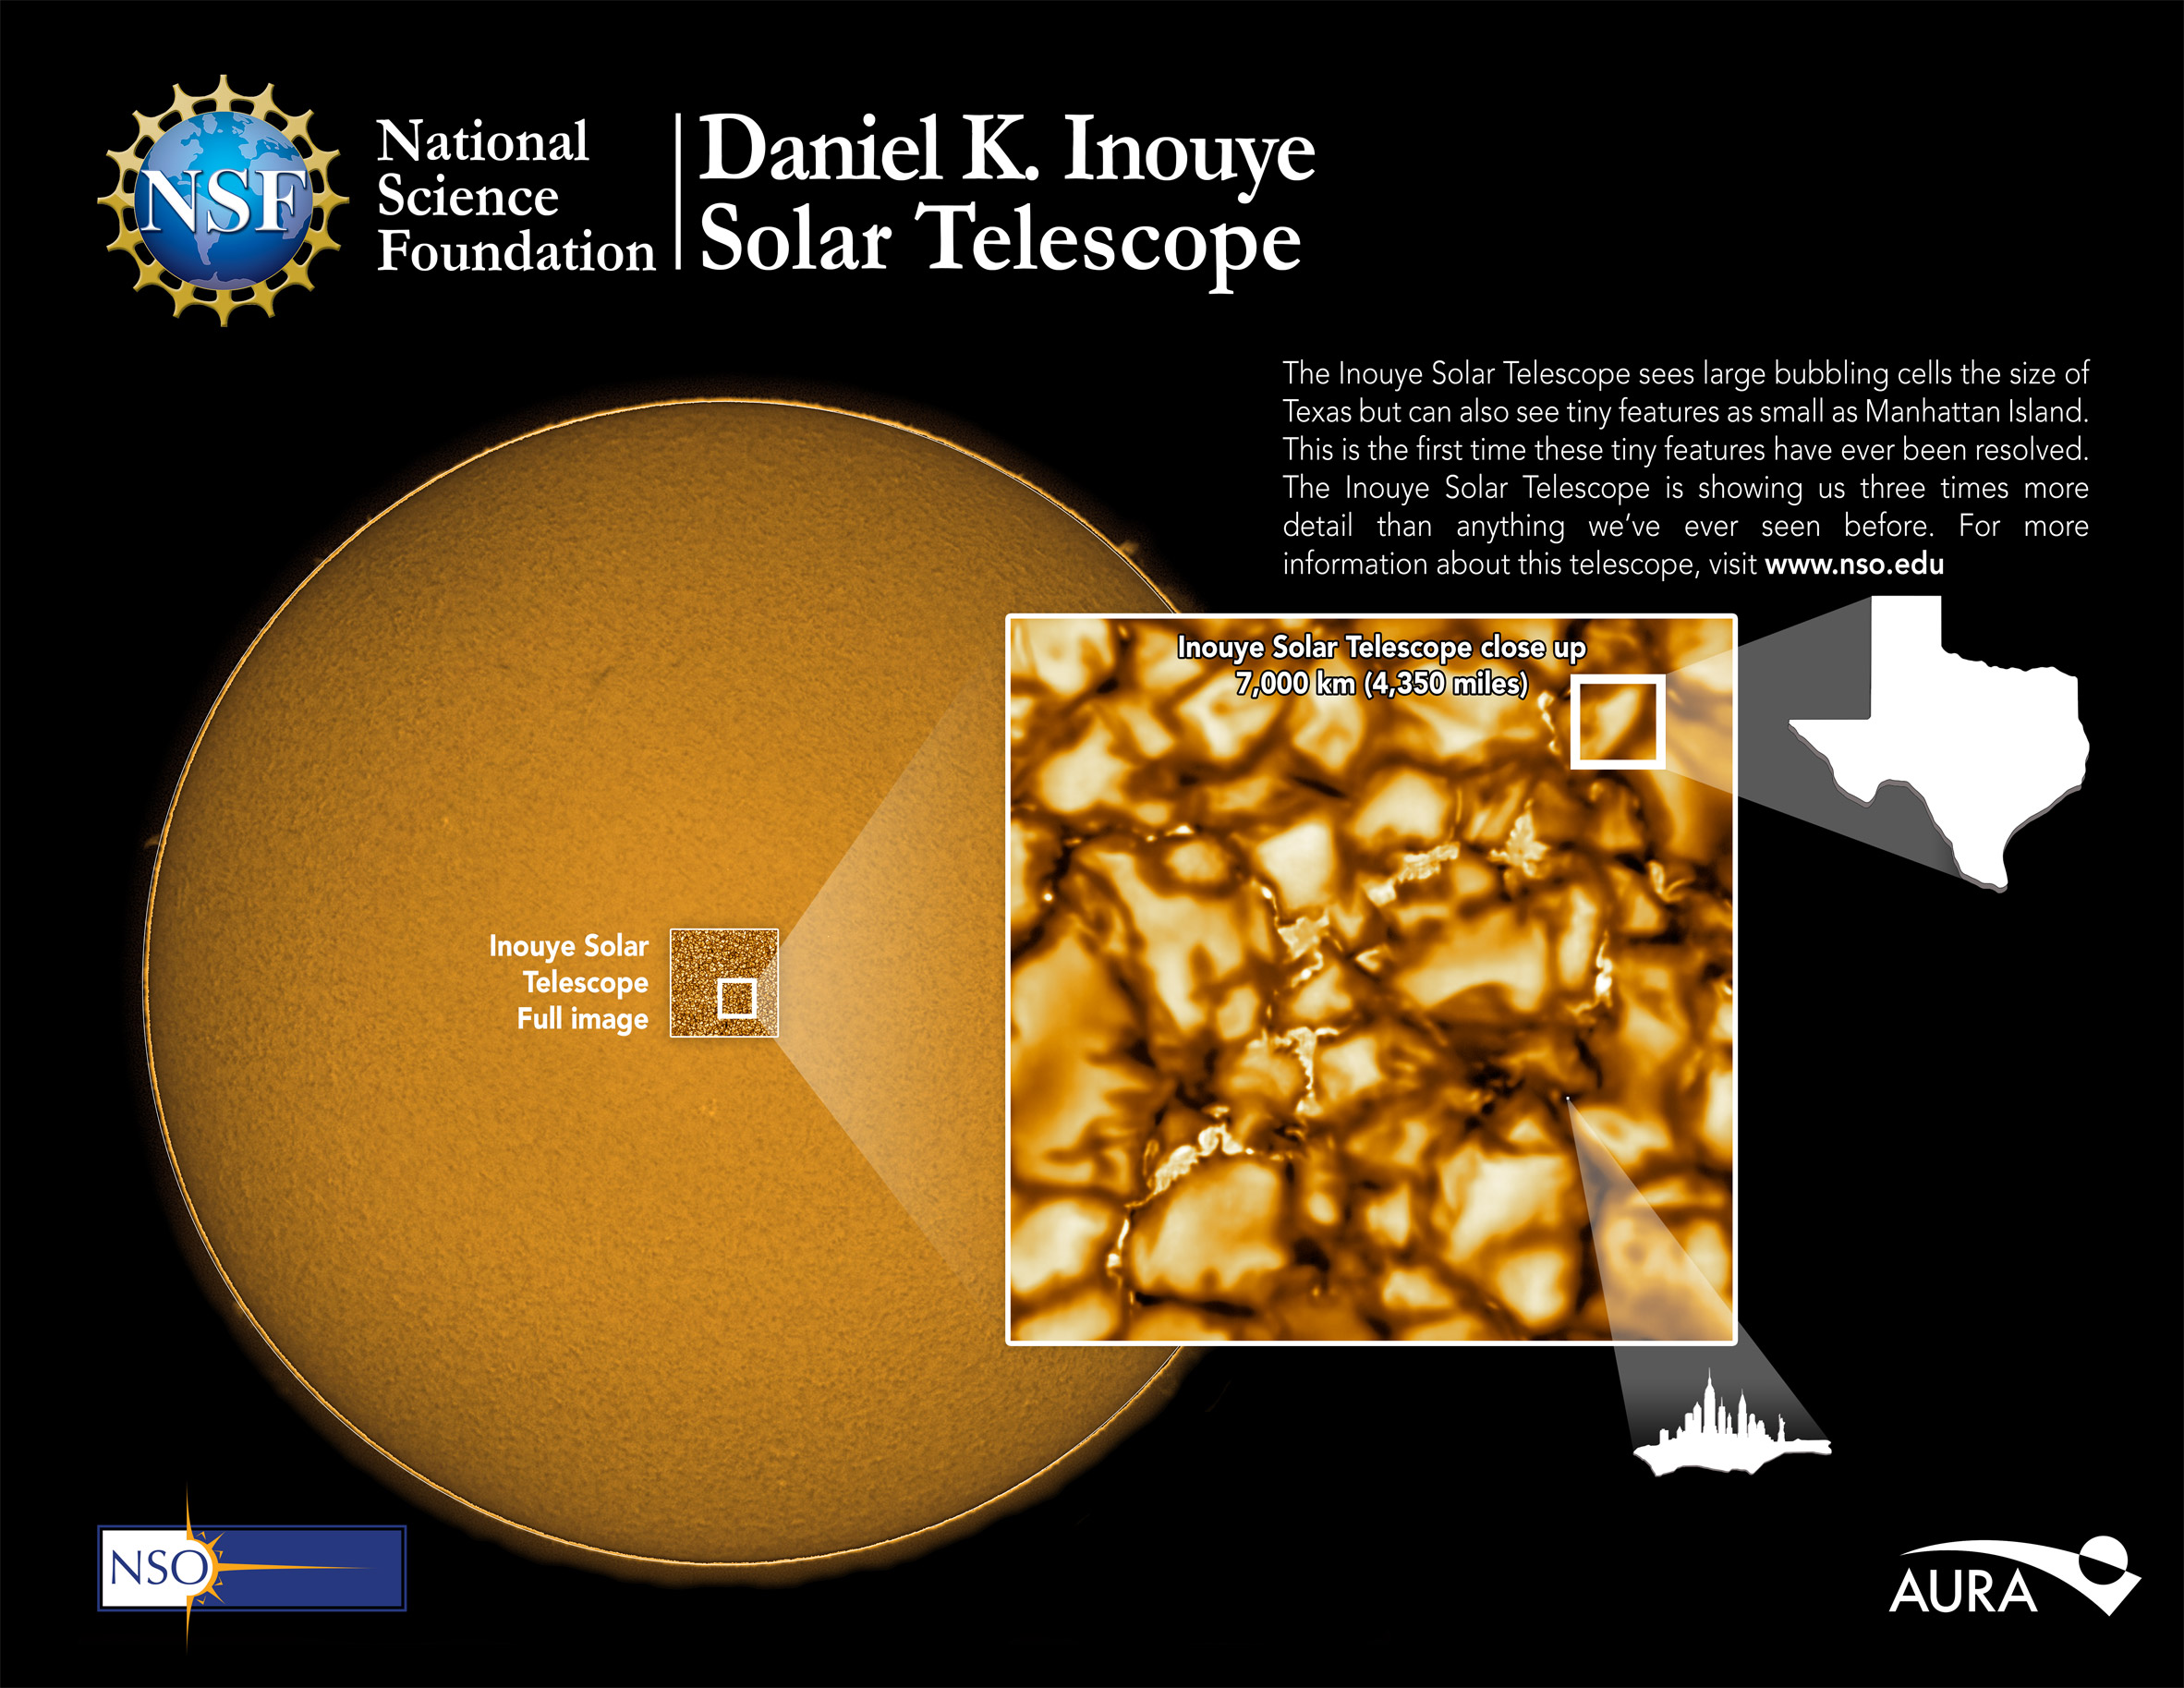 Inouye Solar Telescope takes most detailed images of the sun to date